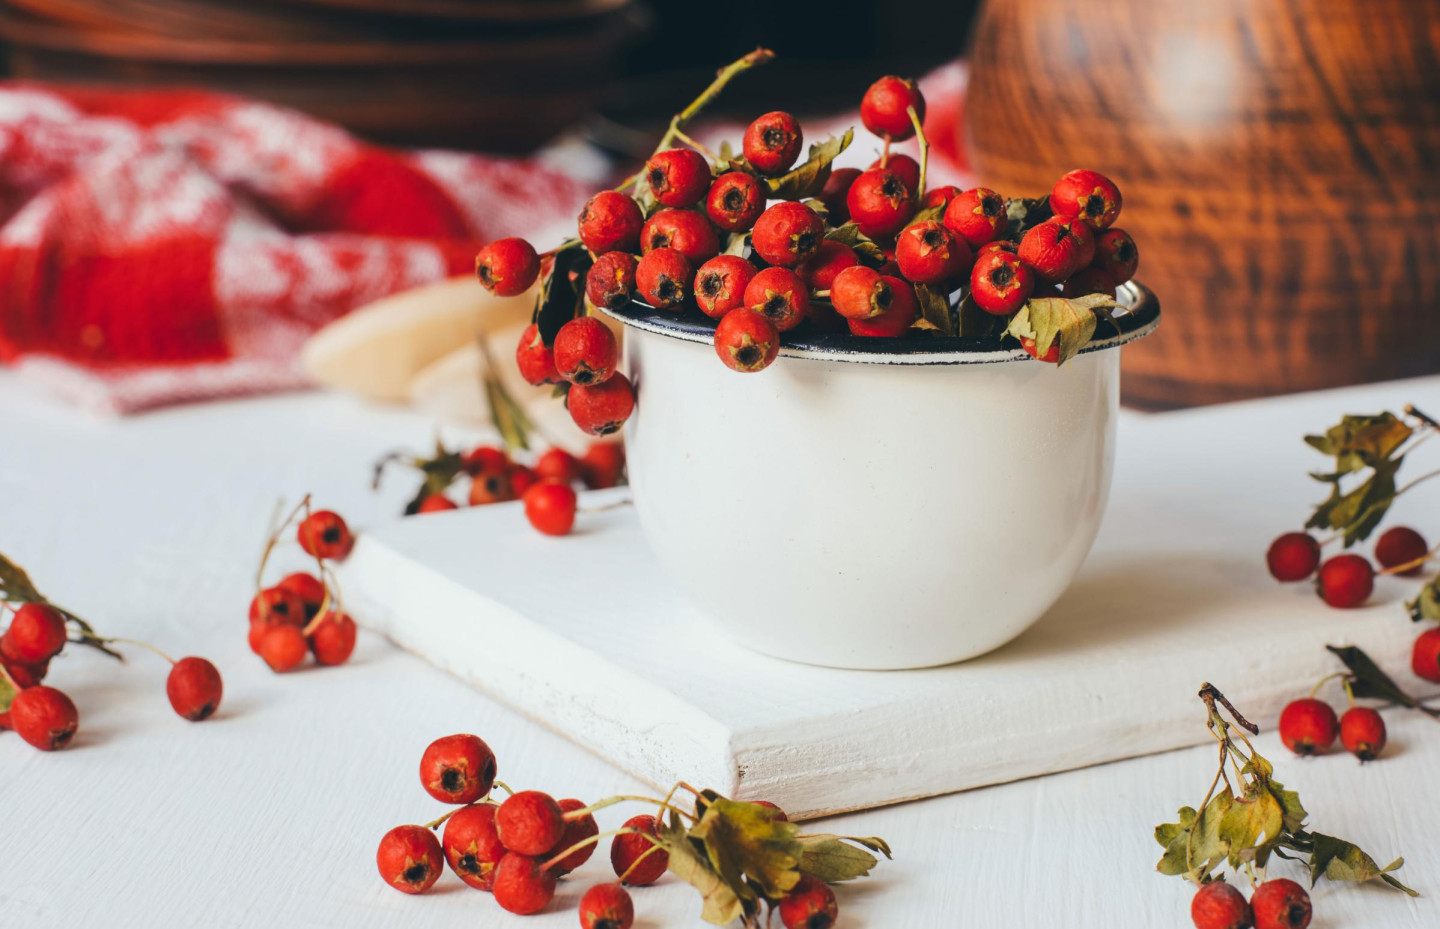 What are the benefits of hawthorn and what can be prepared from it?